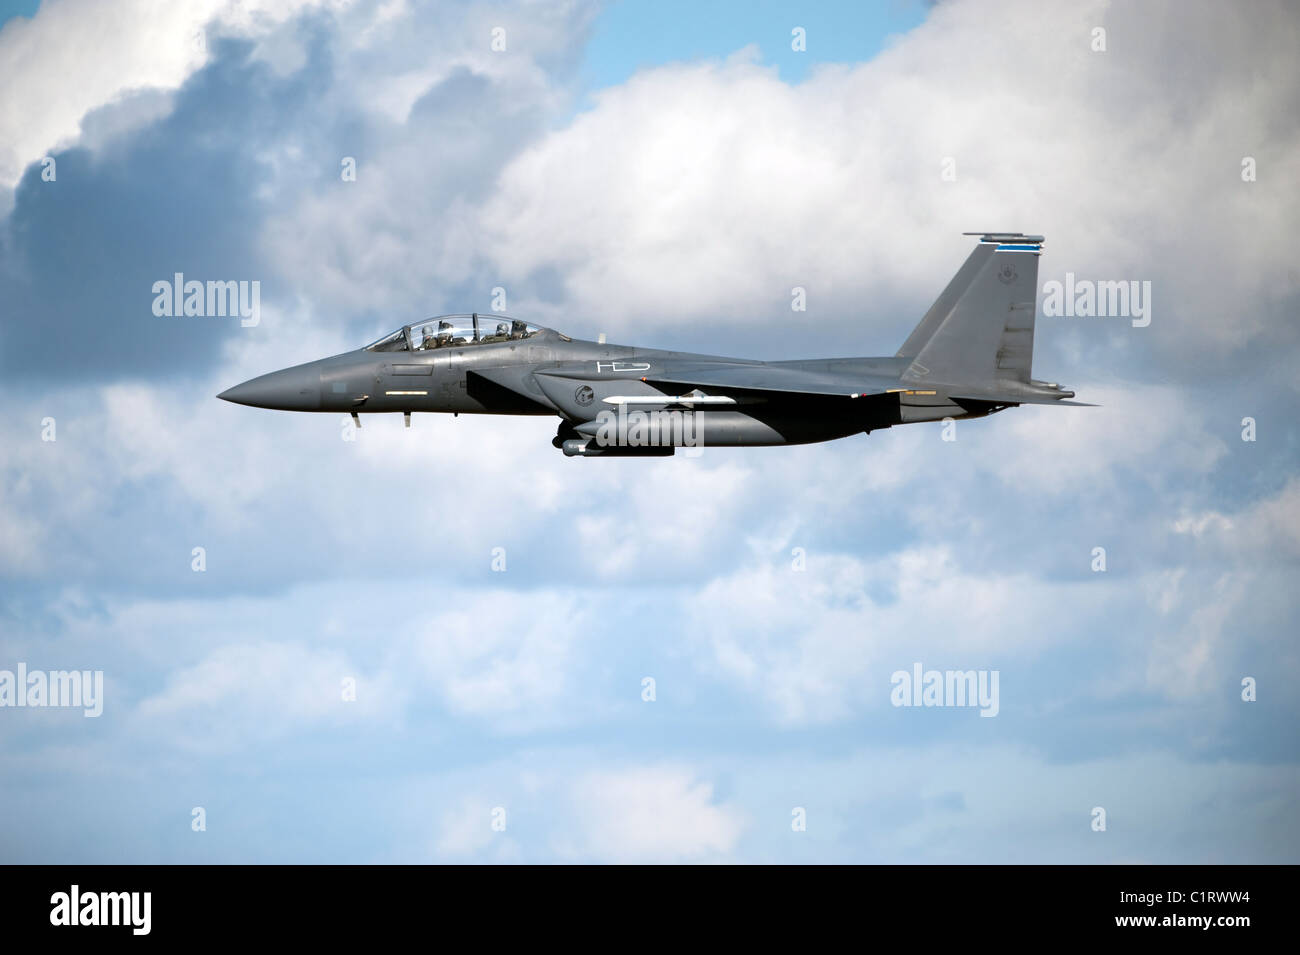 A United States Air Force F-15 Strike Eagle in flight. Stock Photo